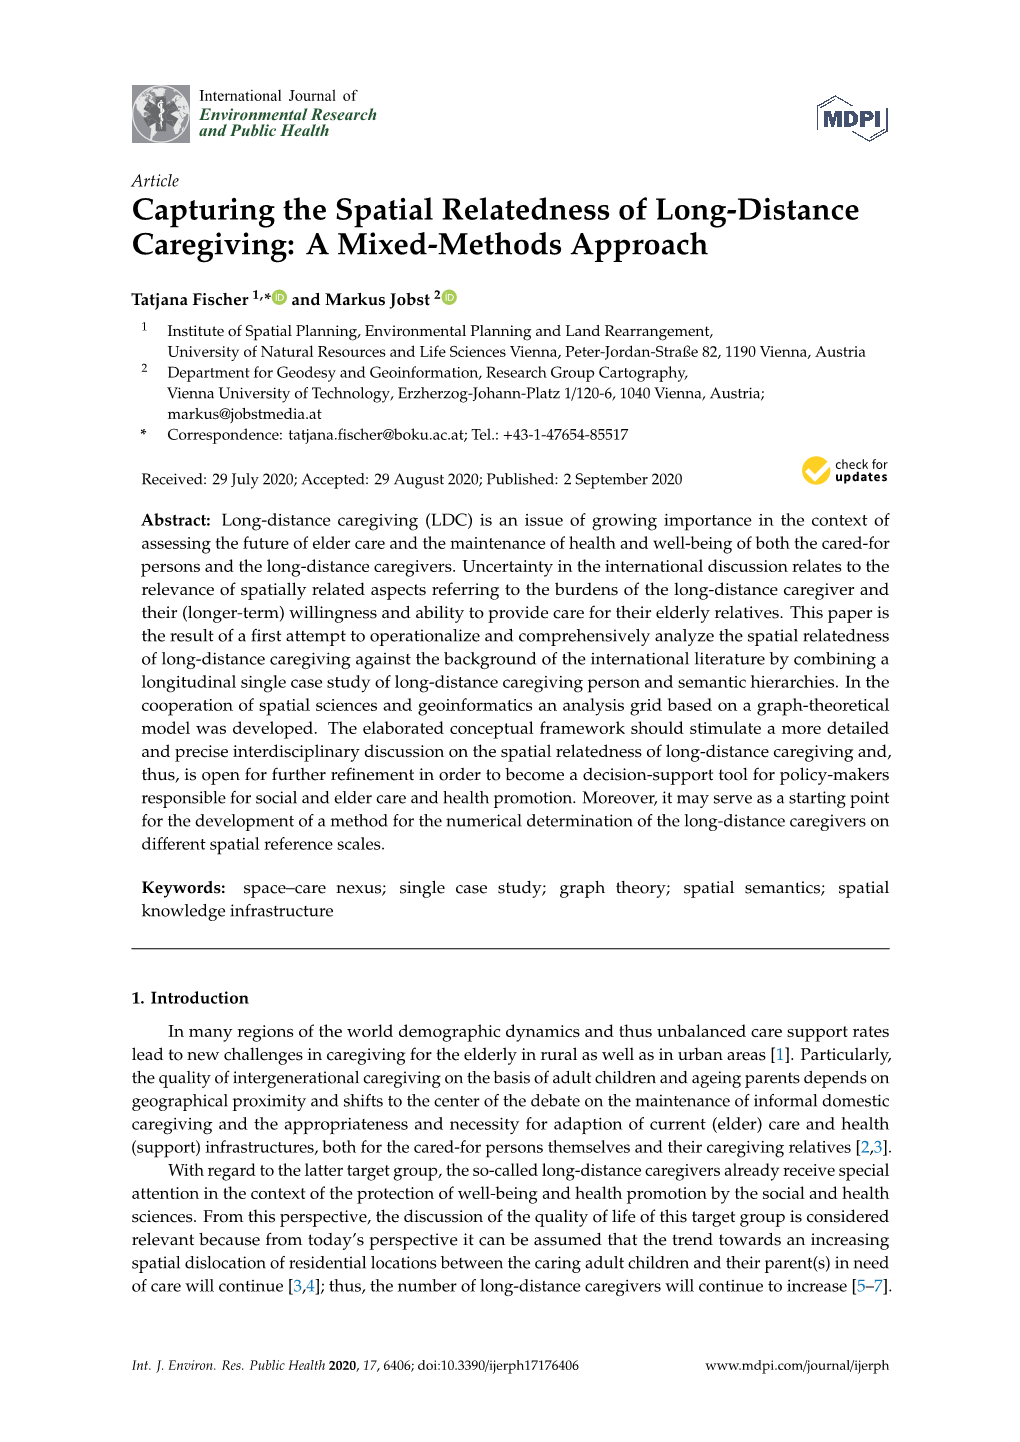 Capturing the Spatial Relatedness of Long-Distance Caregiving: a Mixed-Methods Approach